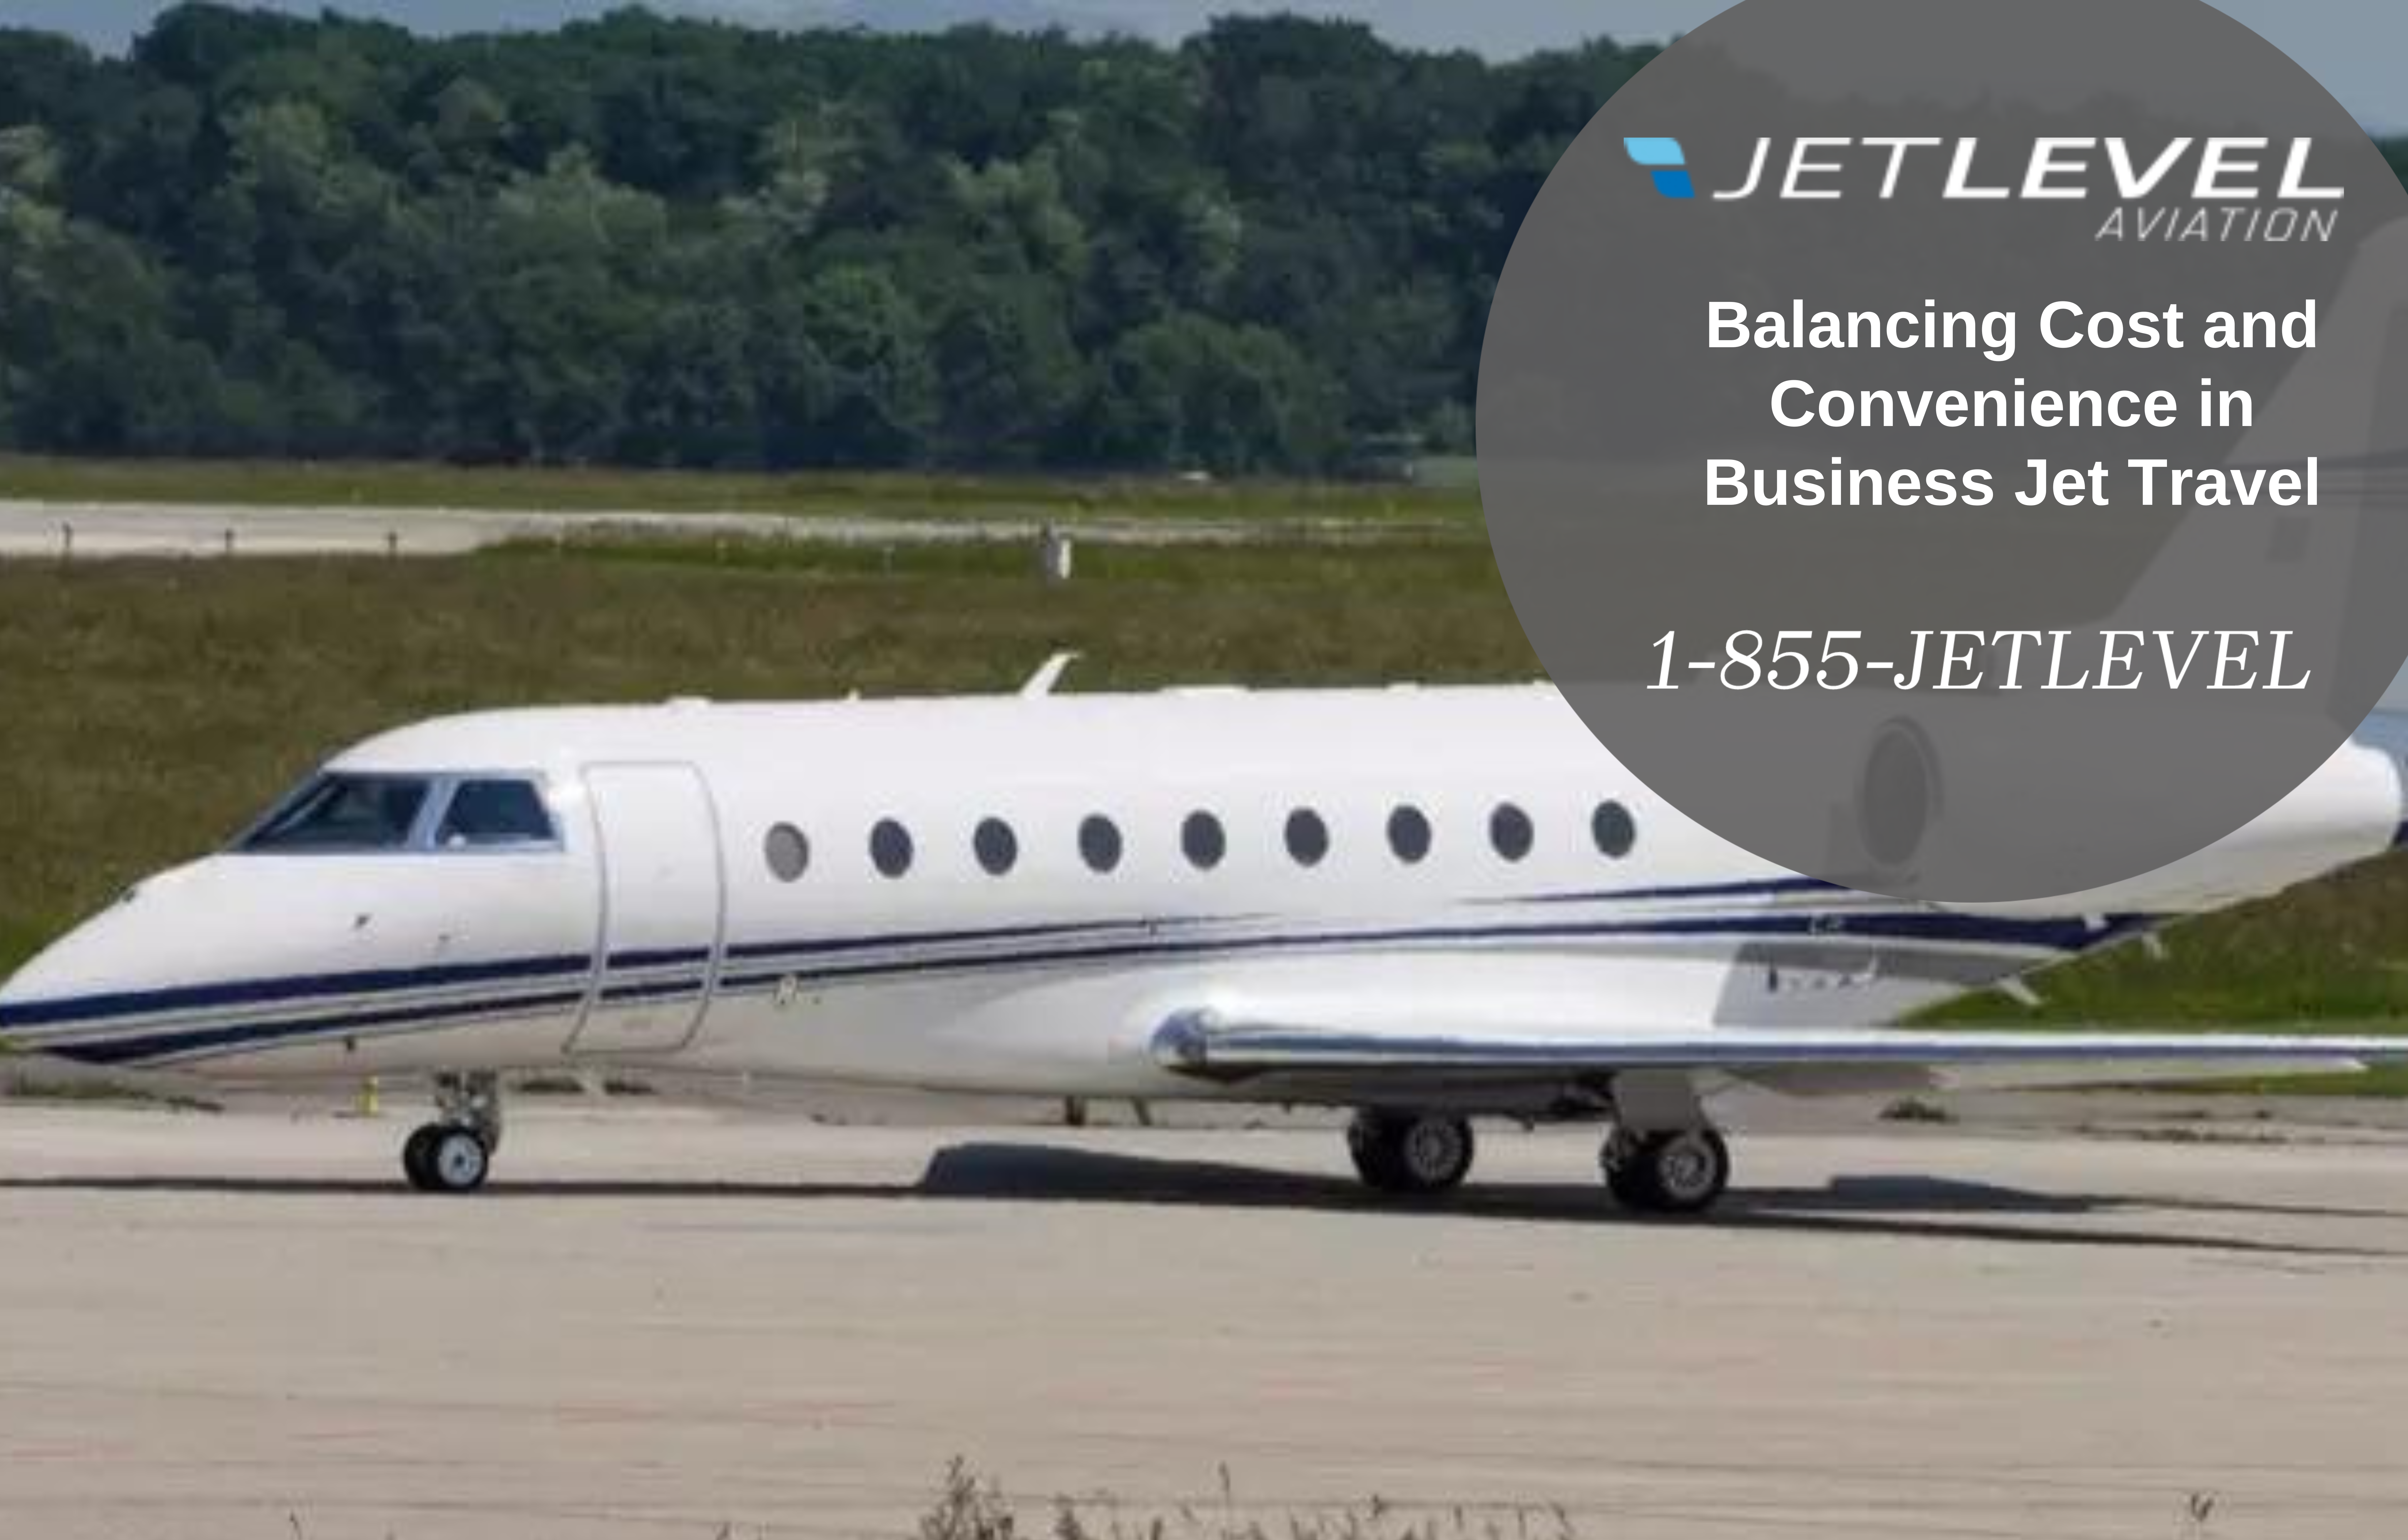 Balancing Cost and Convenience in Business Jet Travel